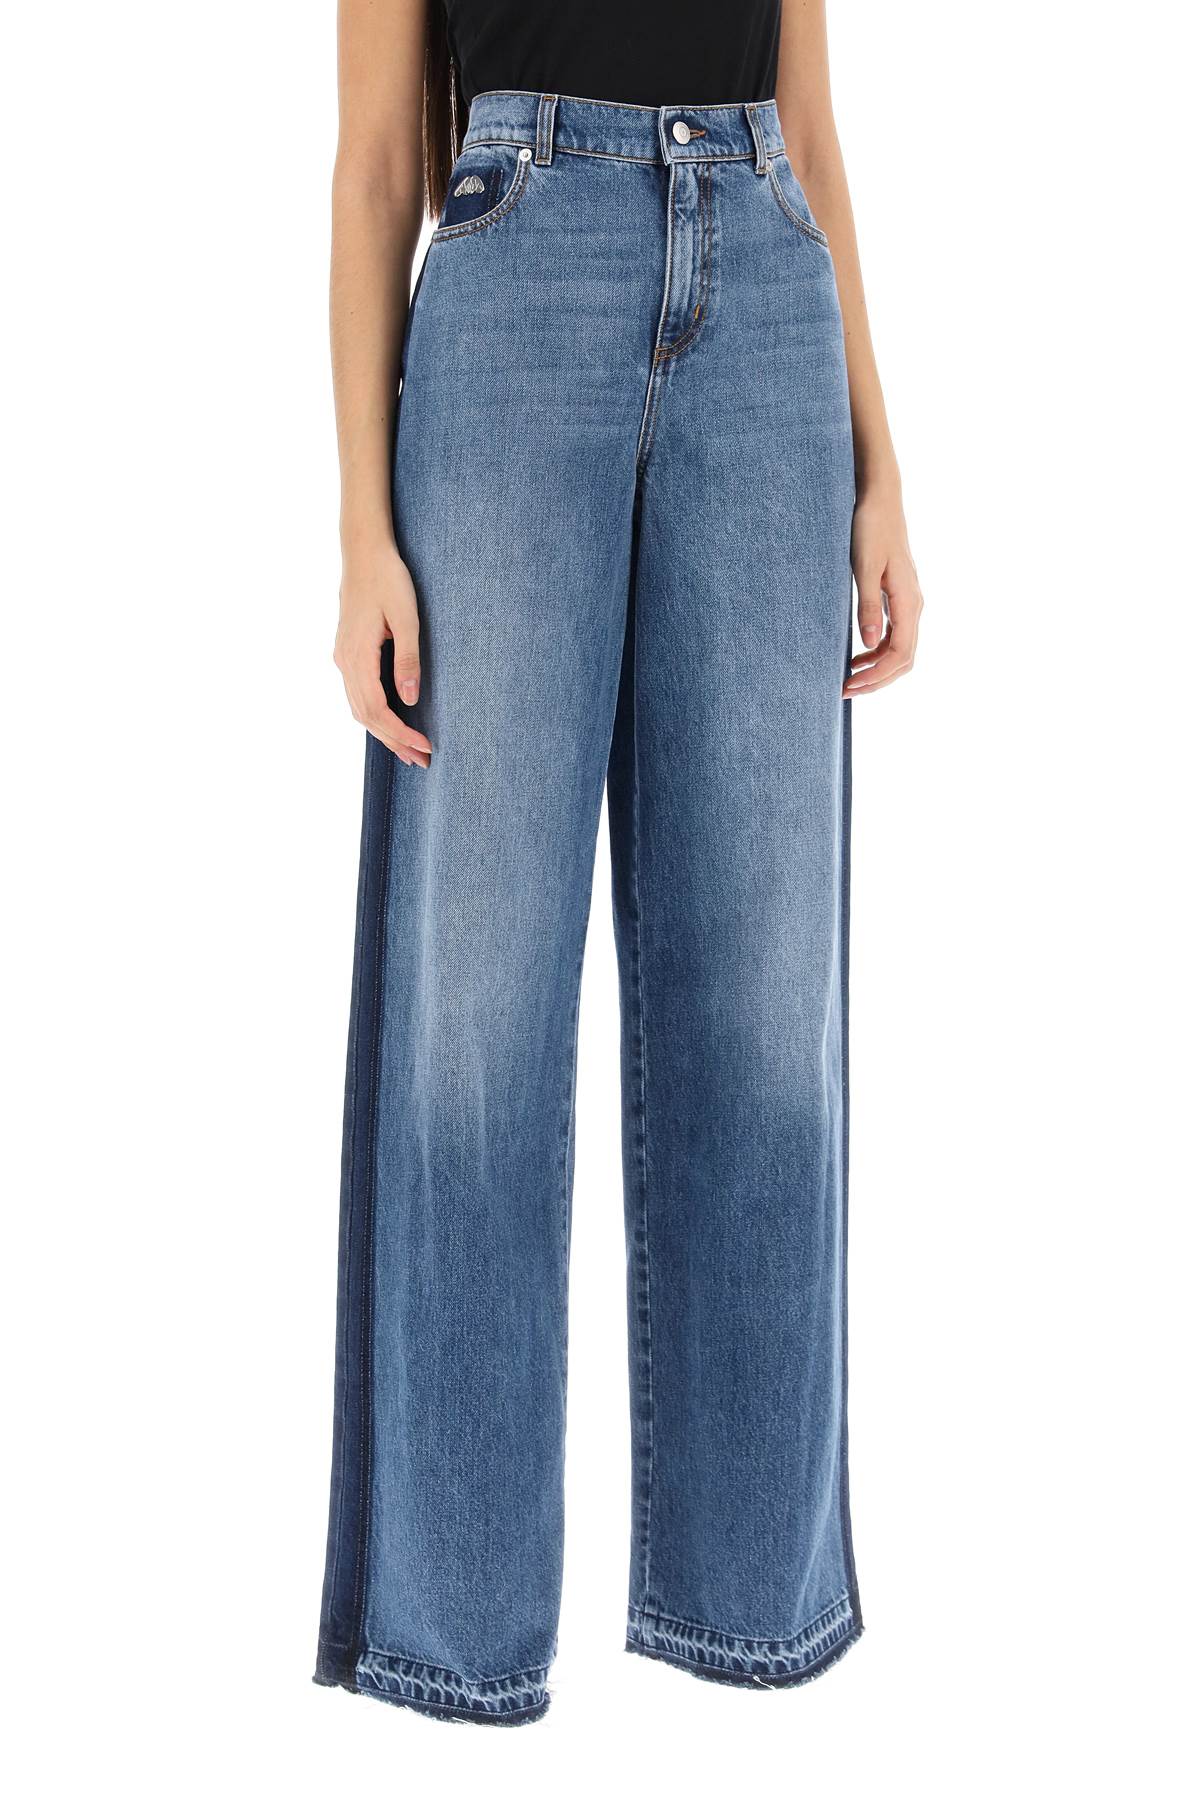 Alexander mcqueen wide leg jeans with contrasting details-1